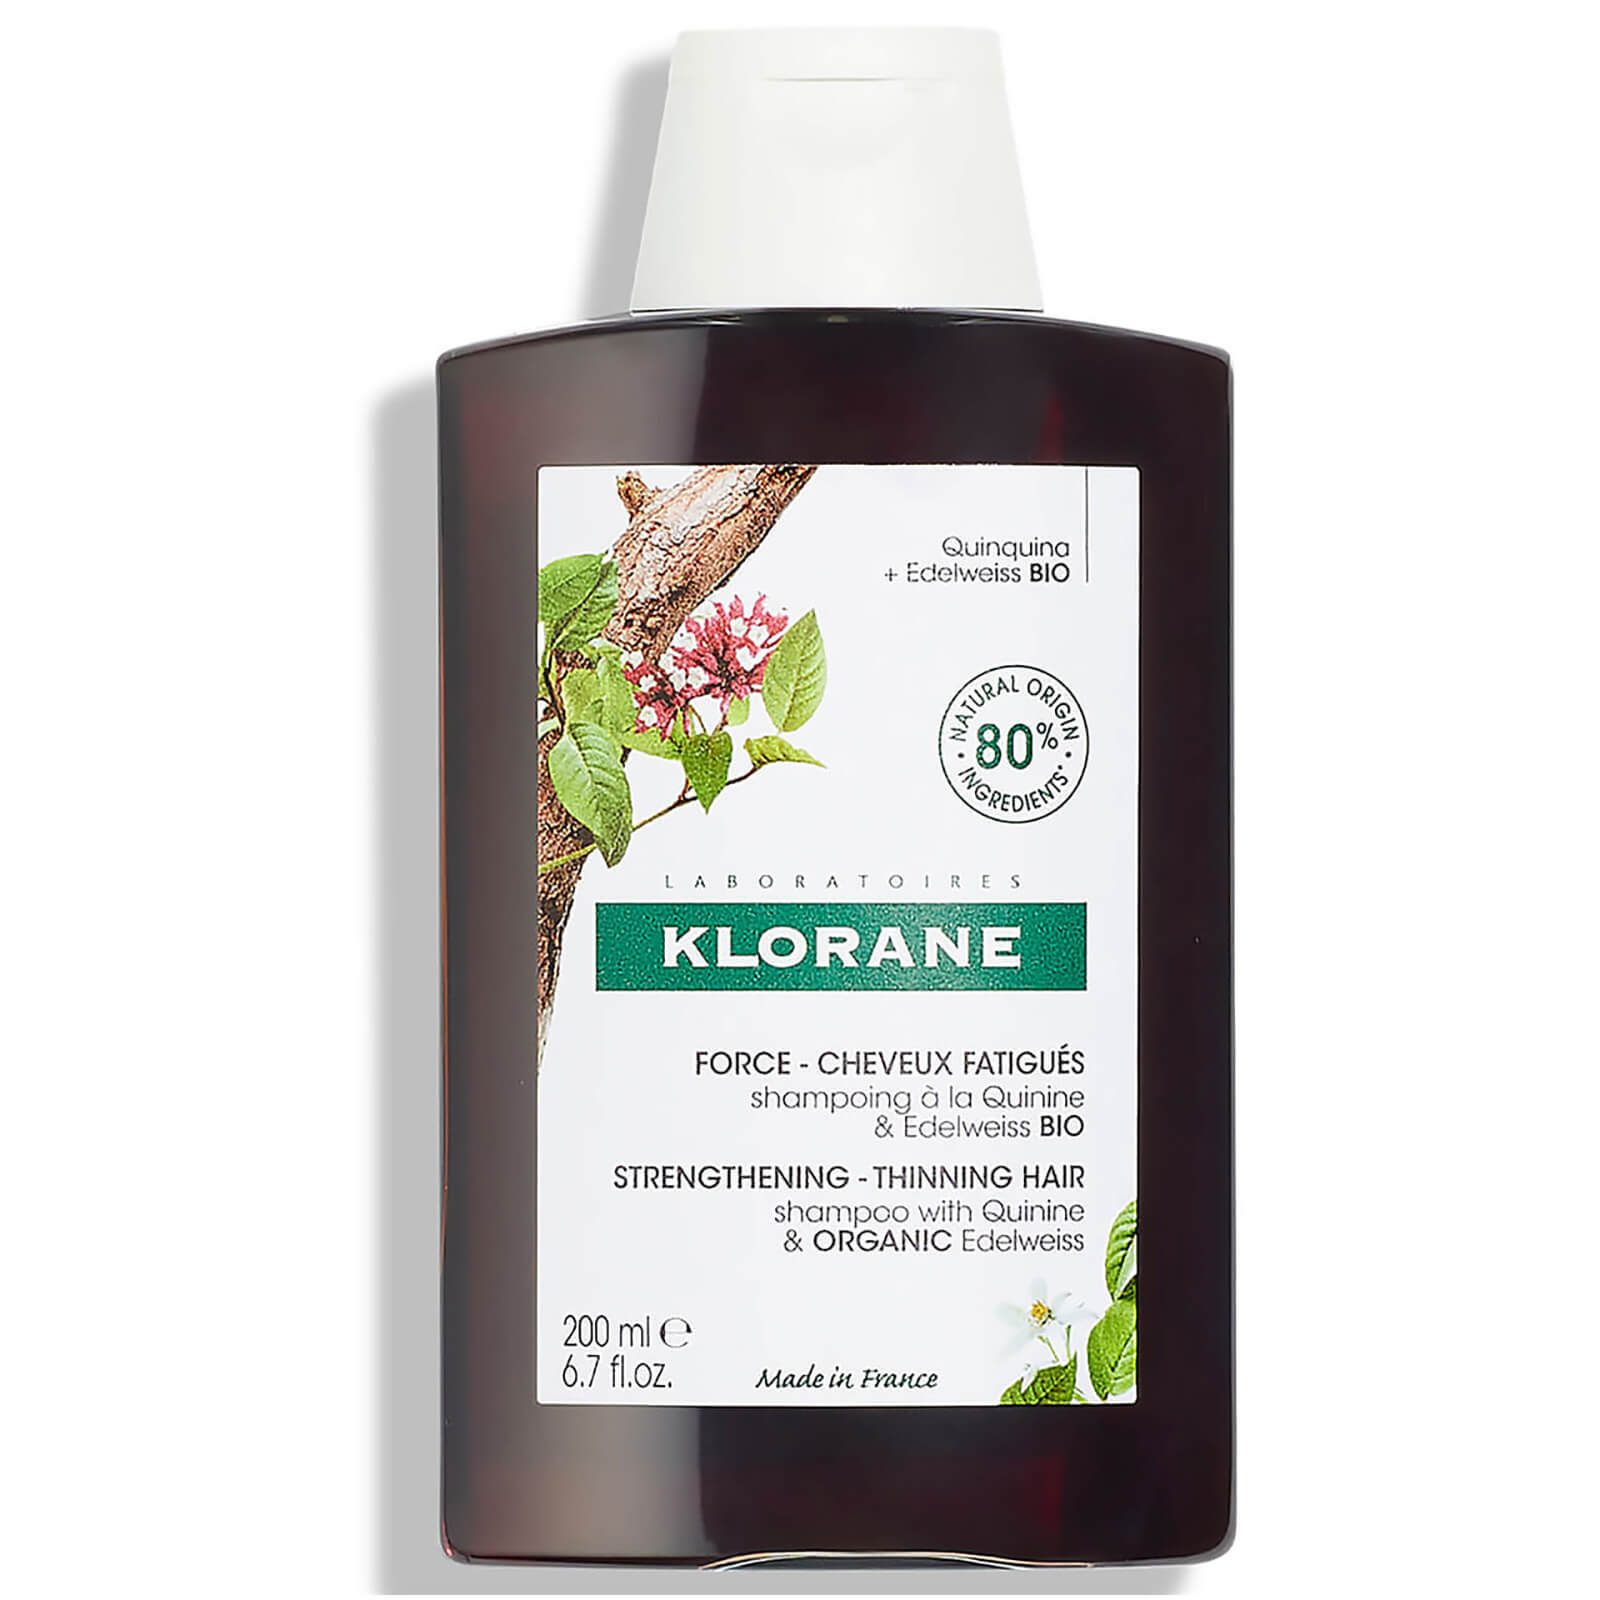 Image of KLORANE Strengthening Shampoo with Quinine and Organic Edelweiss for Thinning Hair 200ml